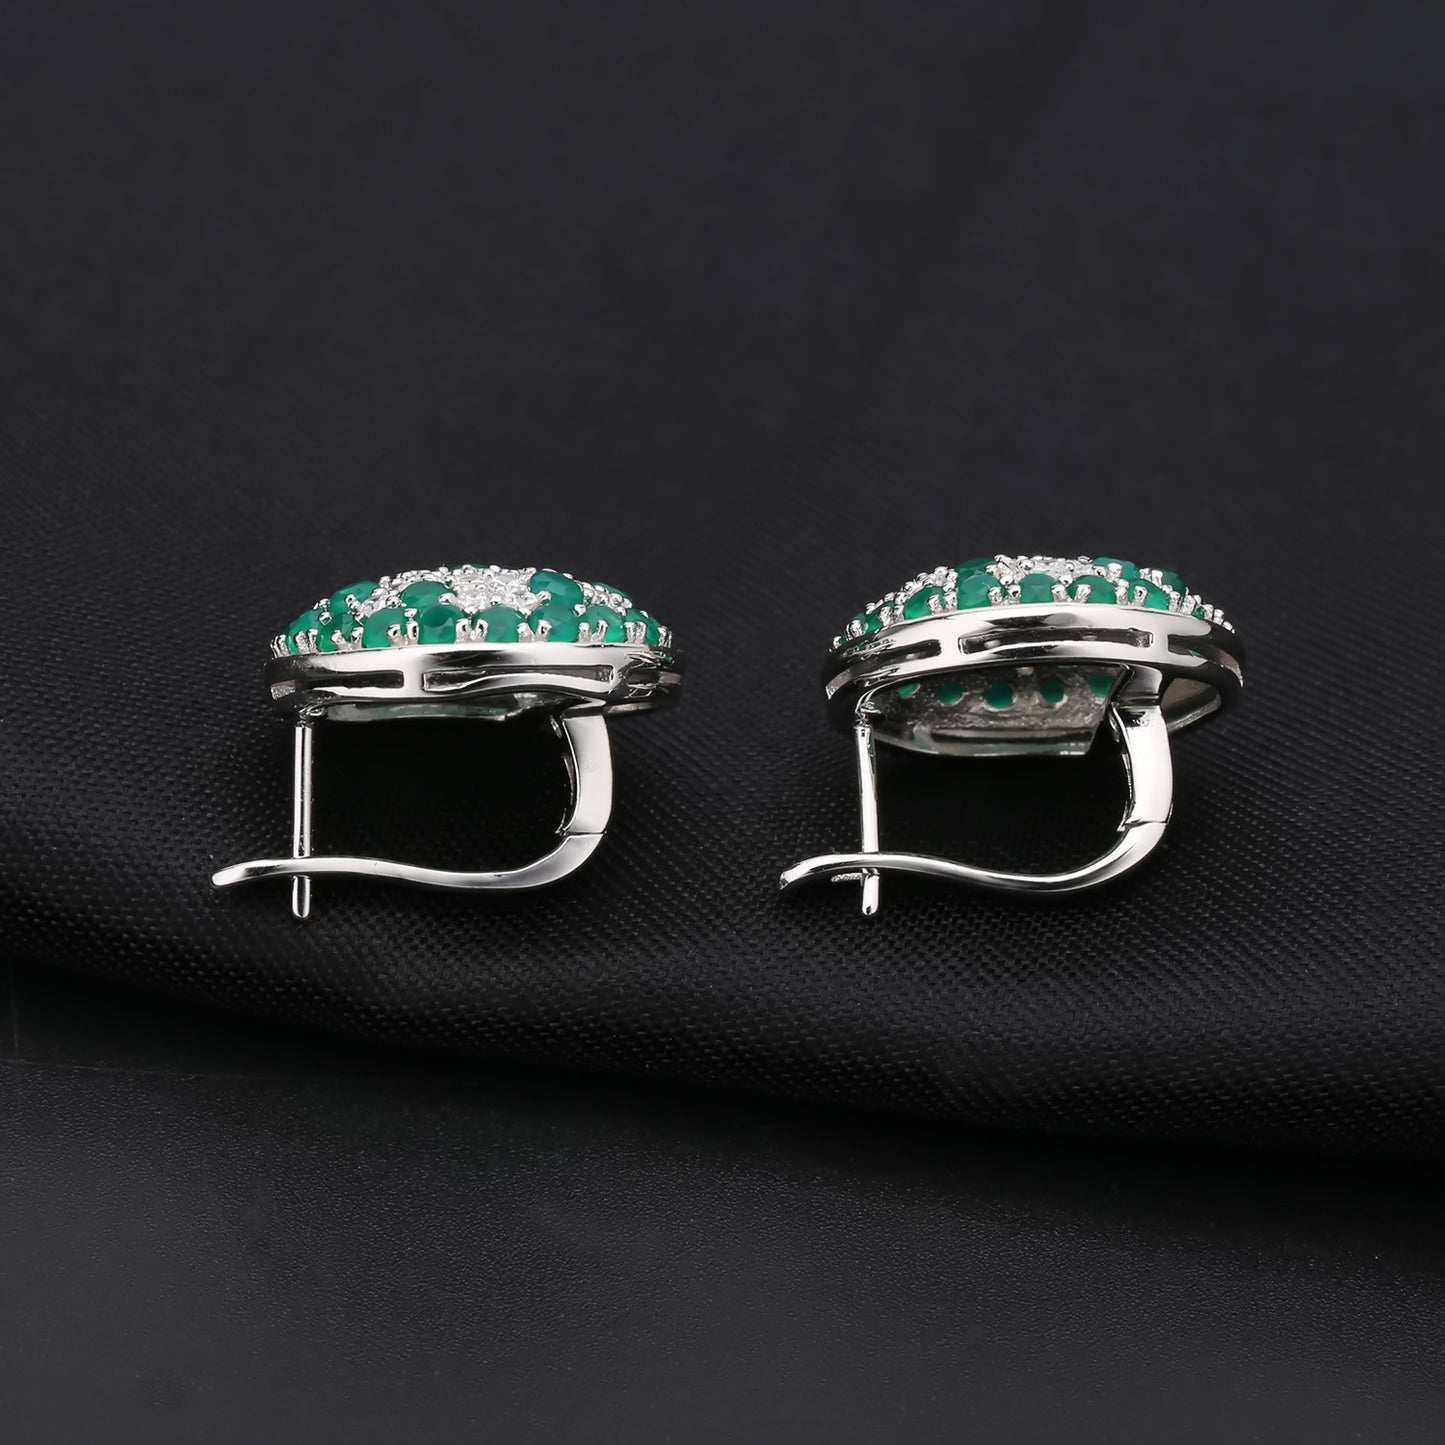 European Vintage Style Group Inlaid Natural Green Agate Circle Sterling Studs Earrings for Women